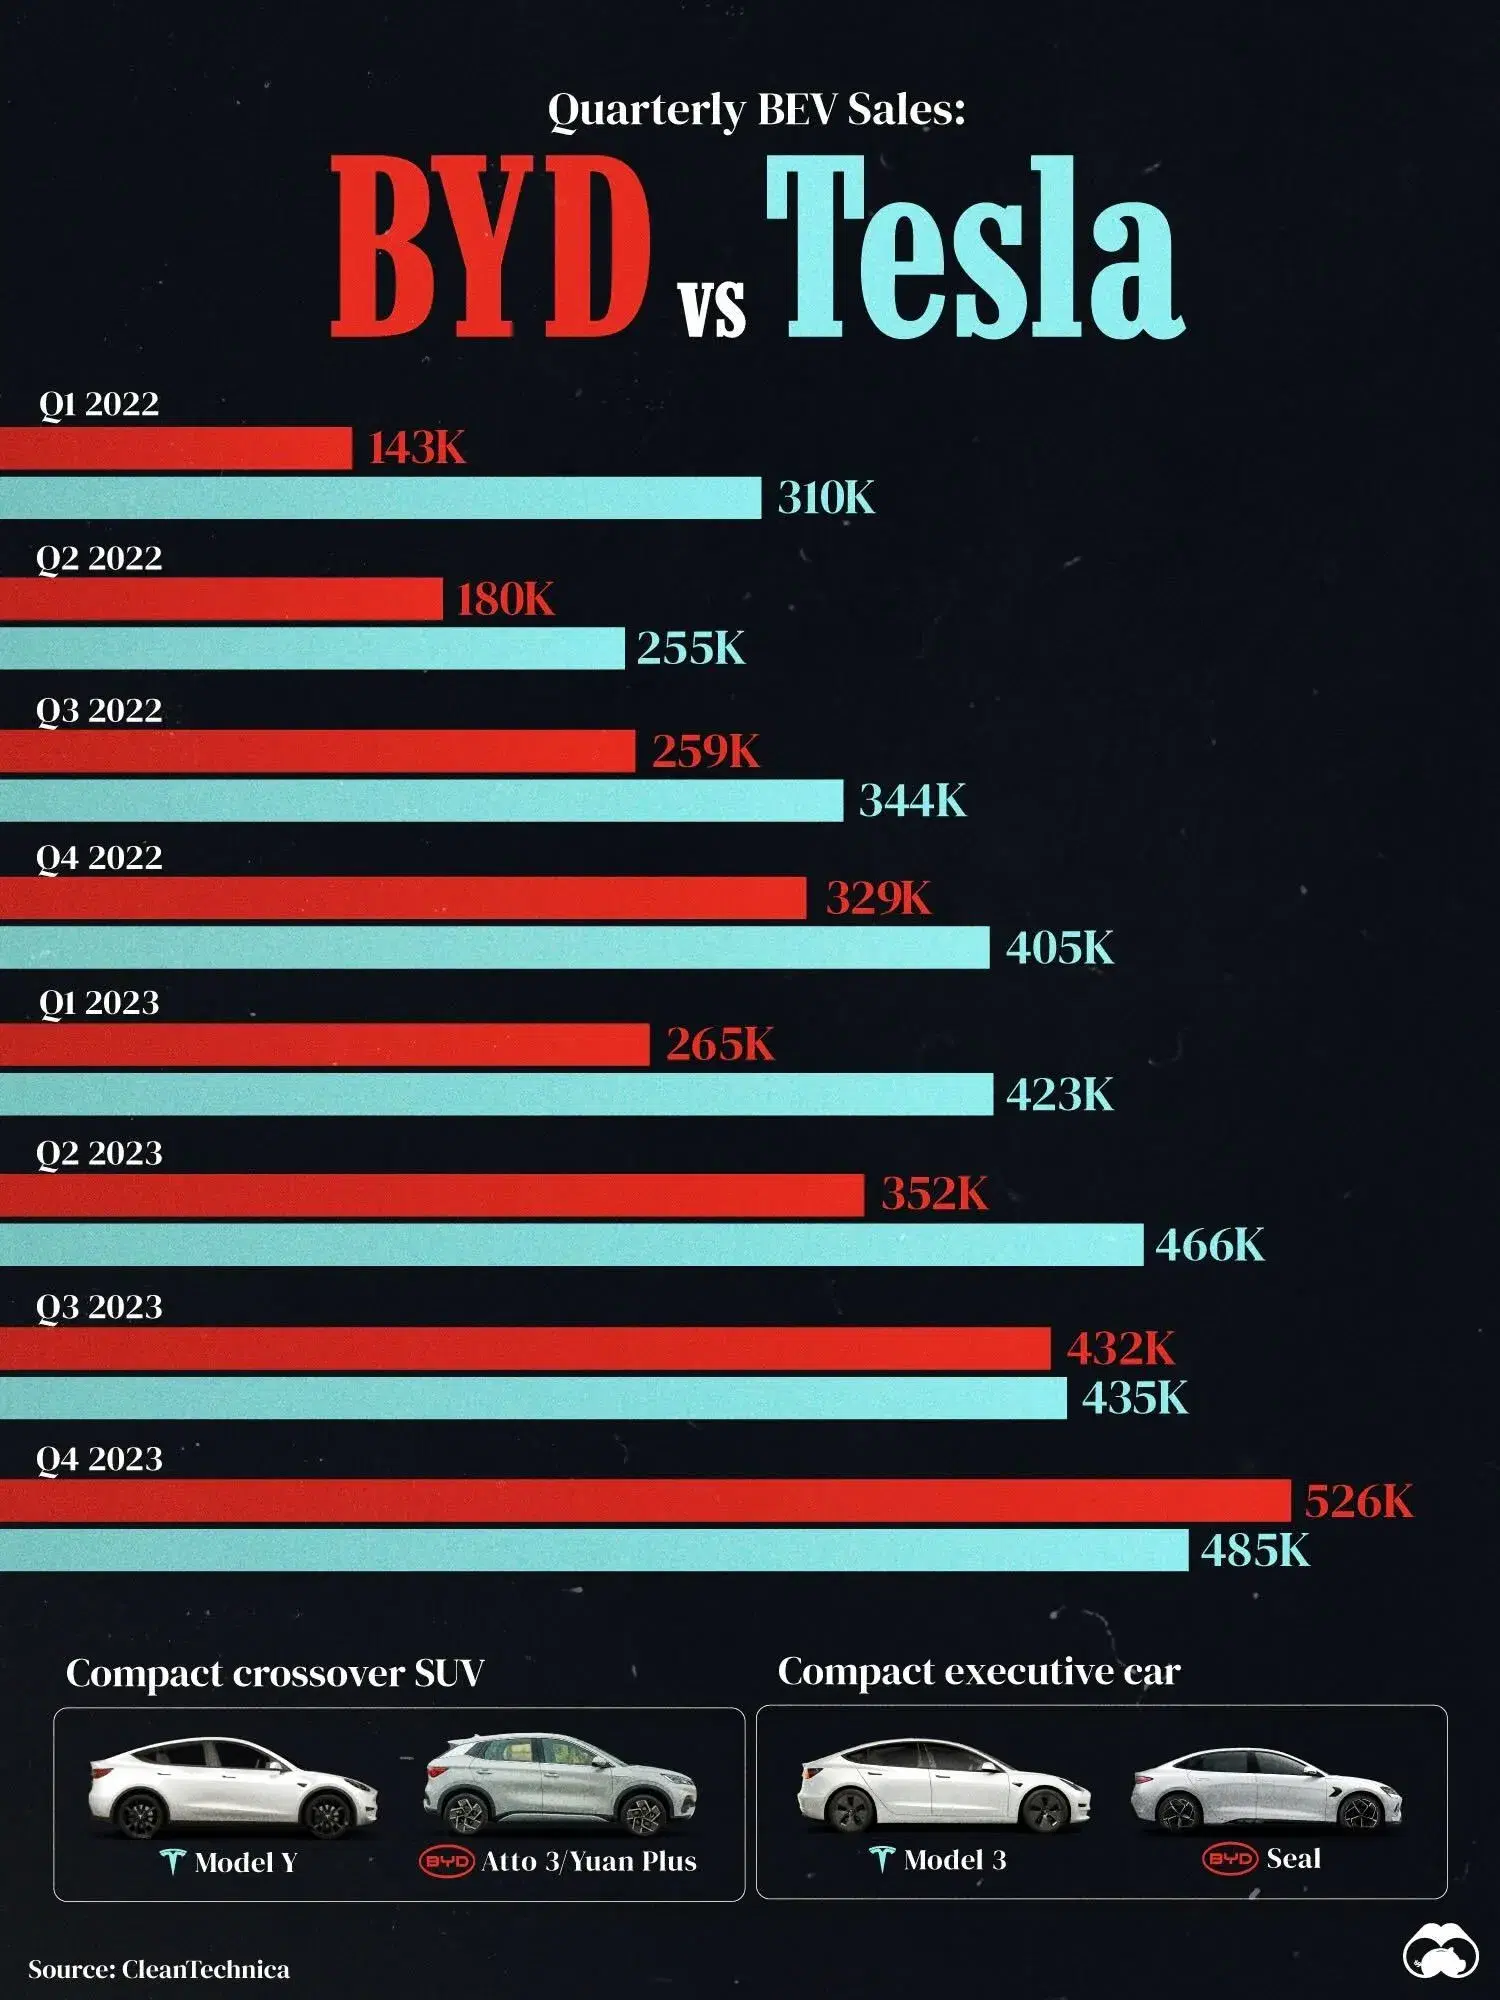 BYD Surpassed Tesla in Global BEV Sales for the First Time Ever 🏆